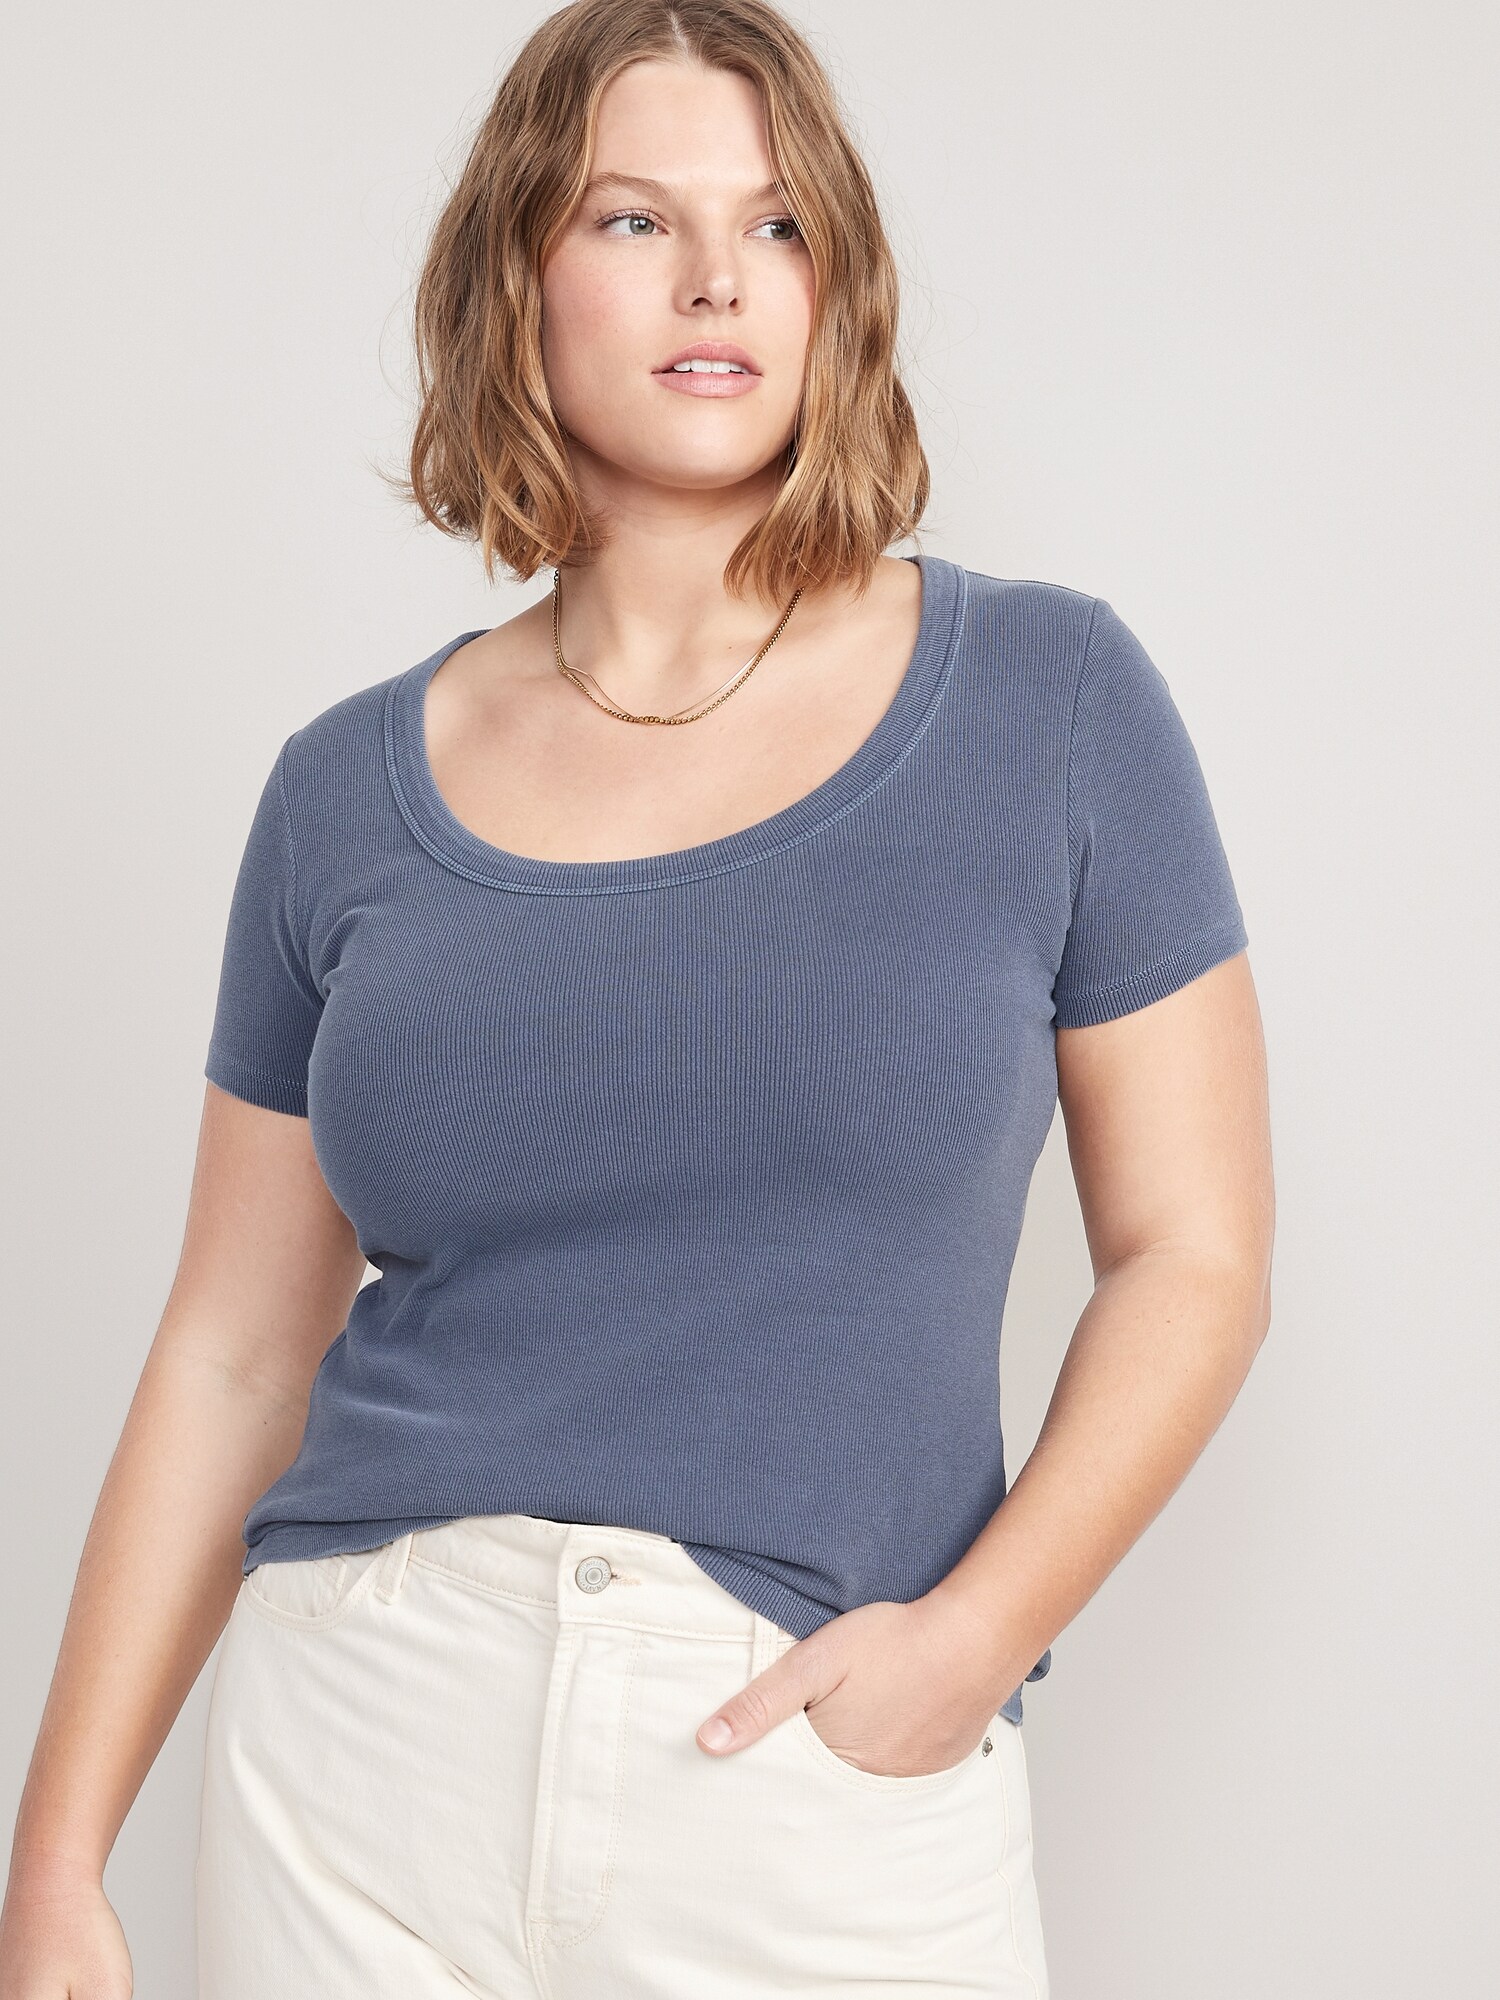 Fashion Look Featuring Athleta Plus Size Pants and Old Navy Tops by  thecerarblend - ShopStyle